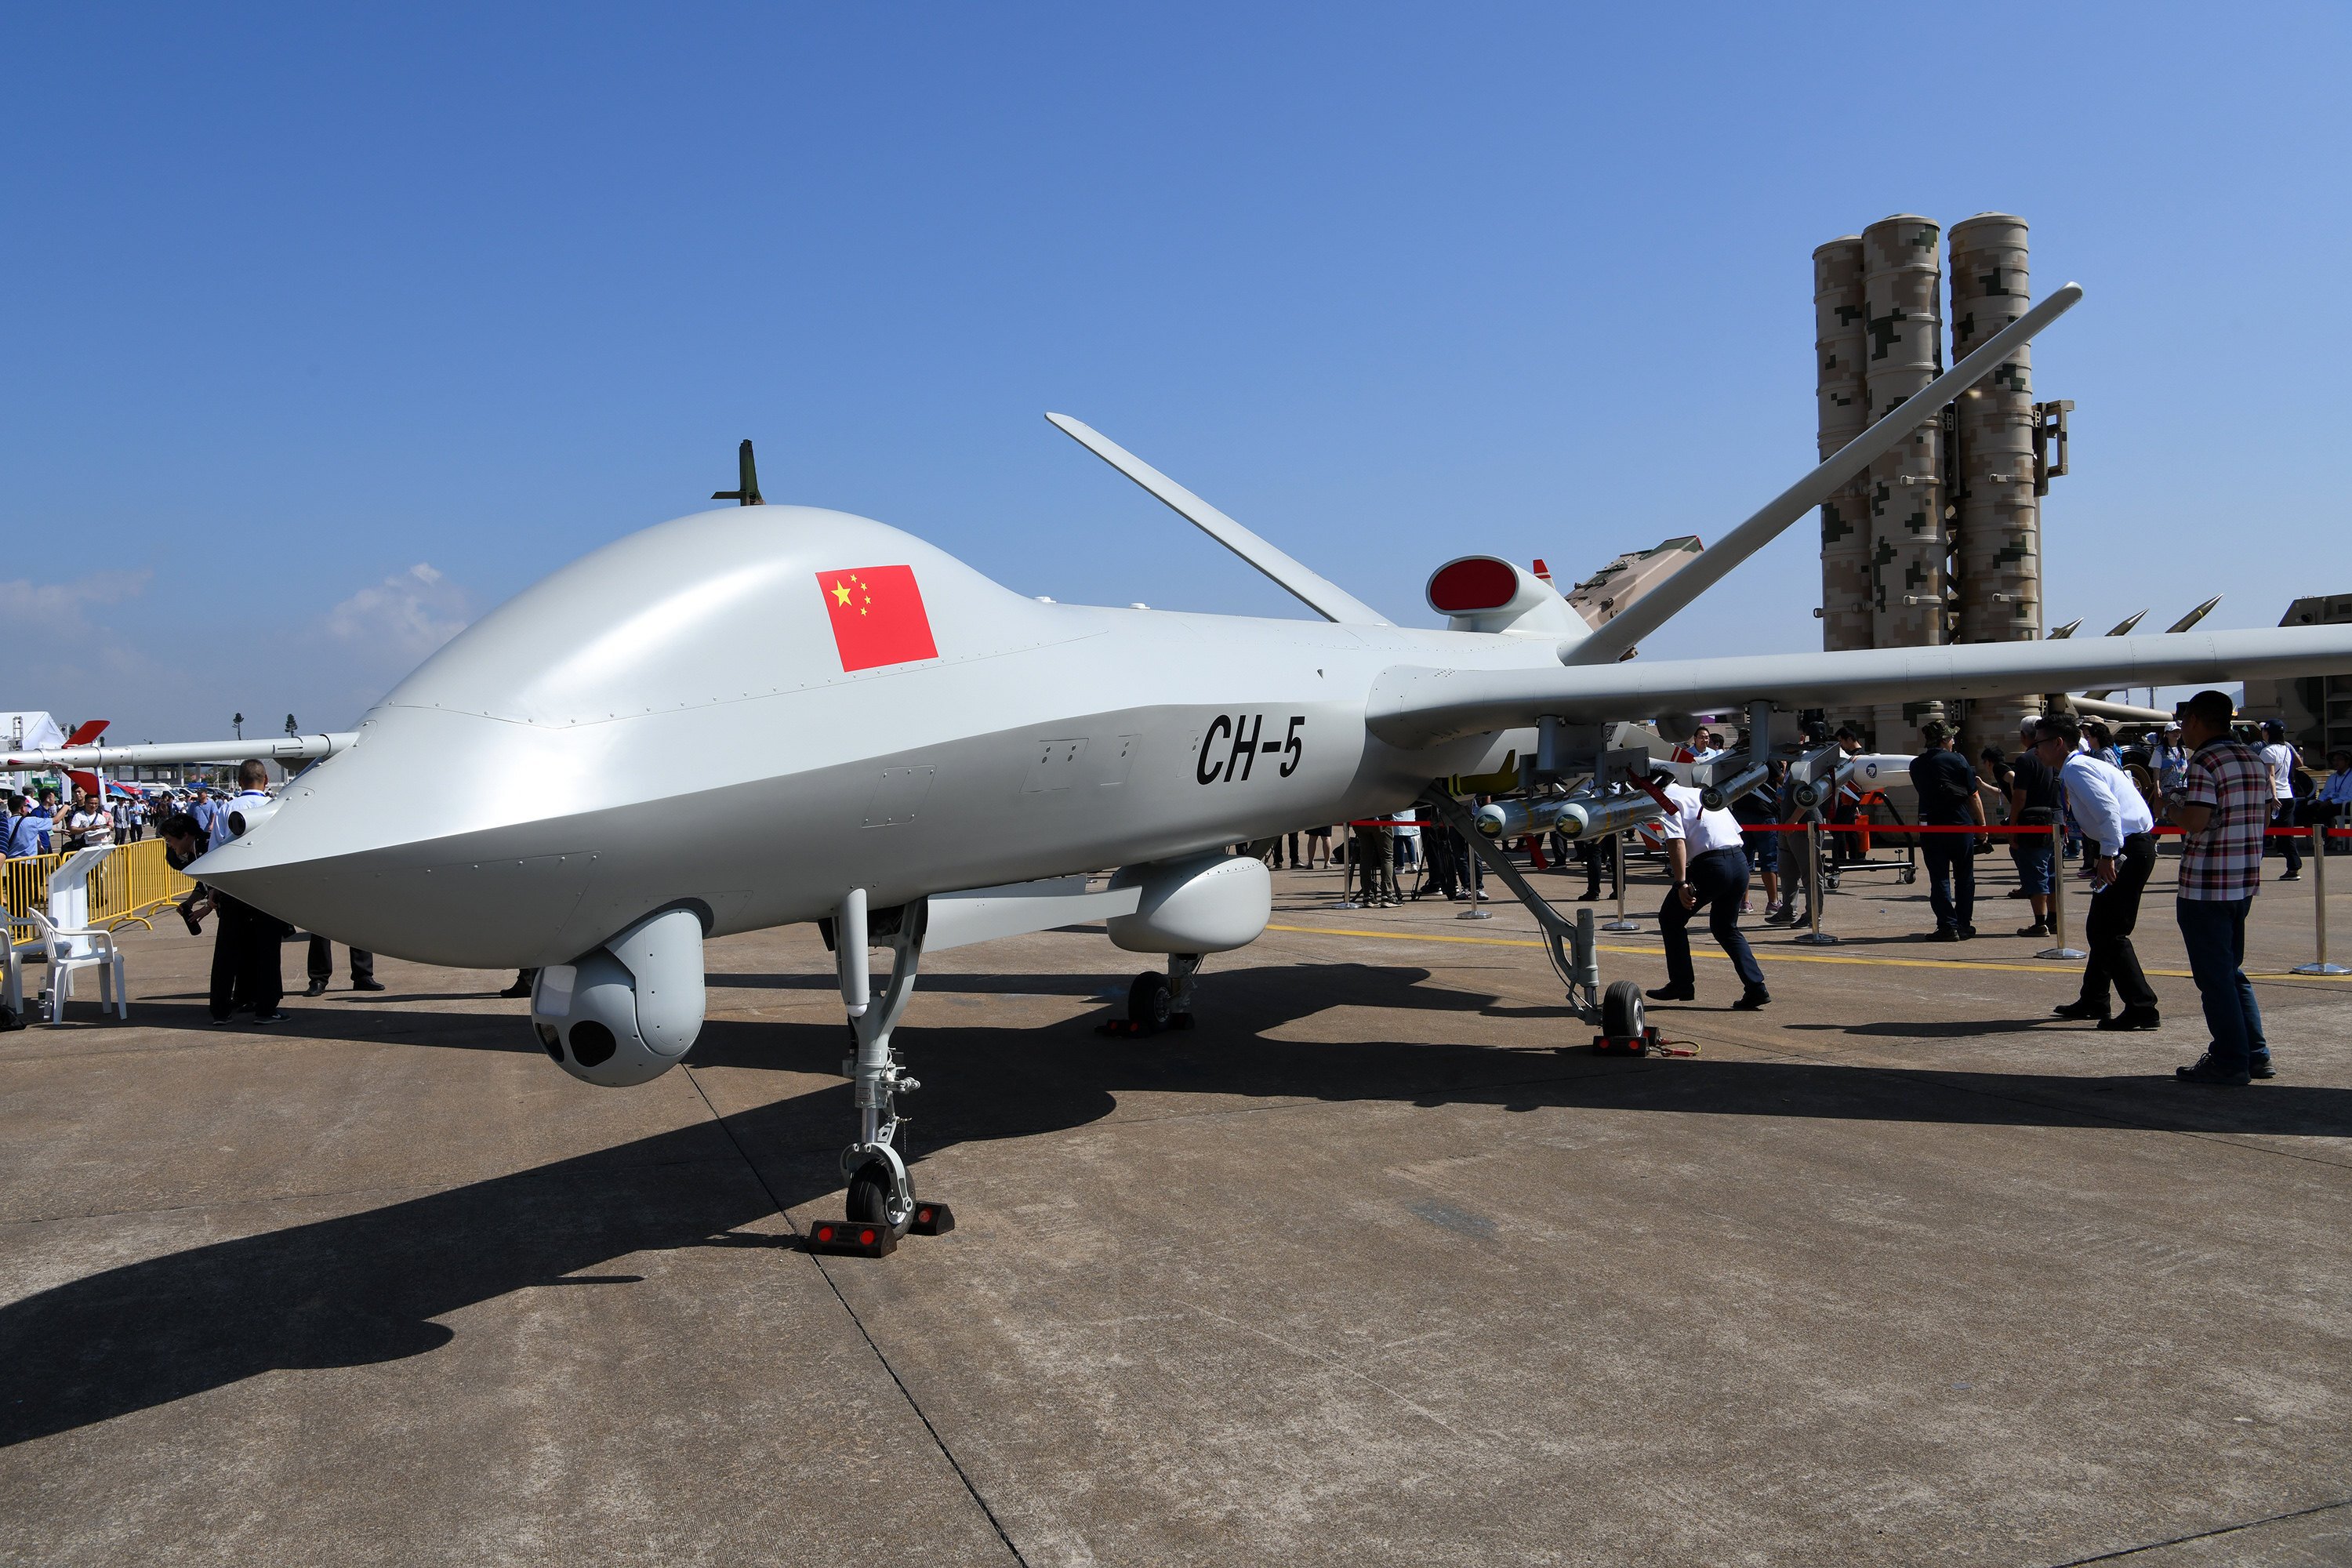 Chinese drones in demand Algeria and Egypt eye orders from world's leading UAV exporter | South China Morning Post